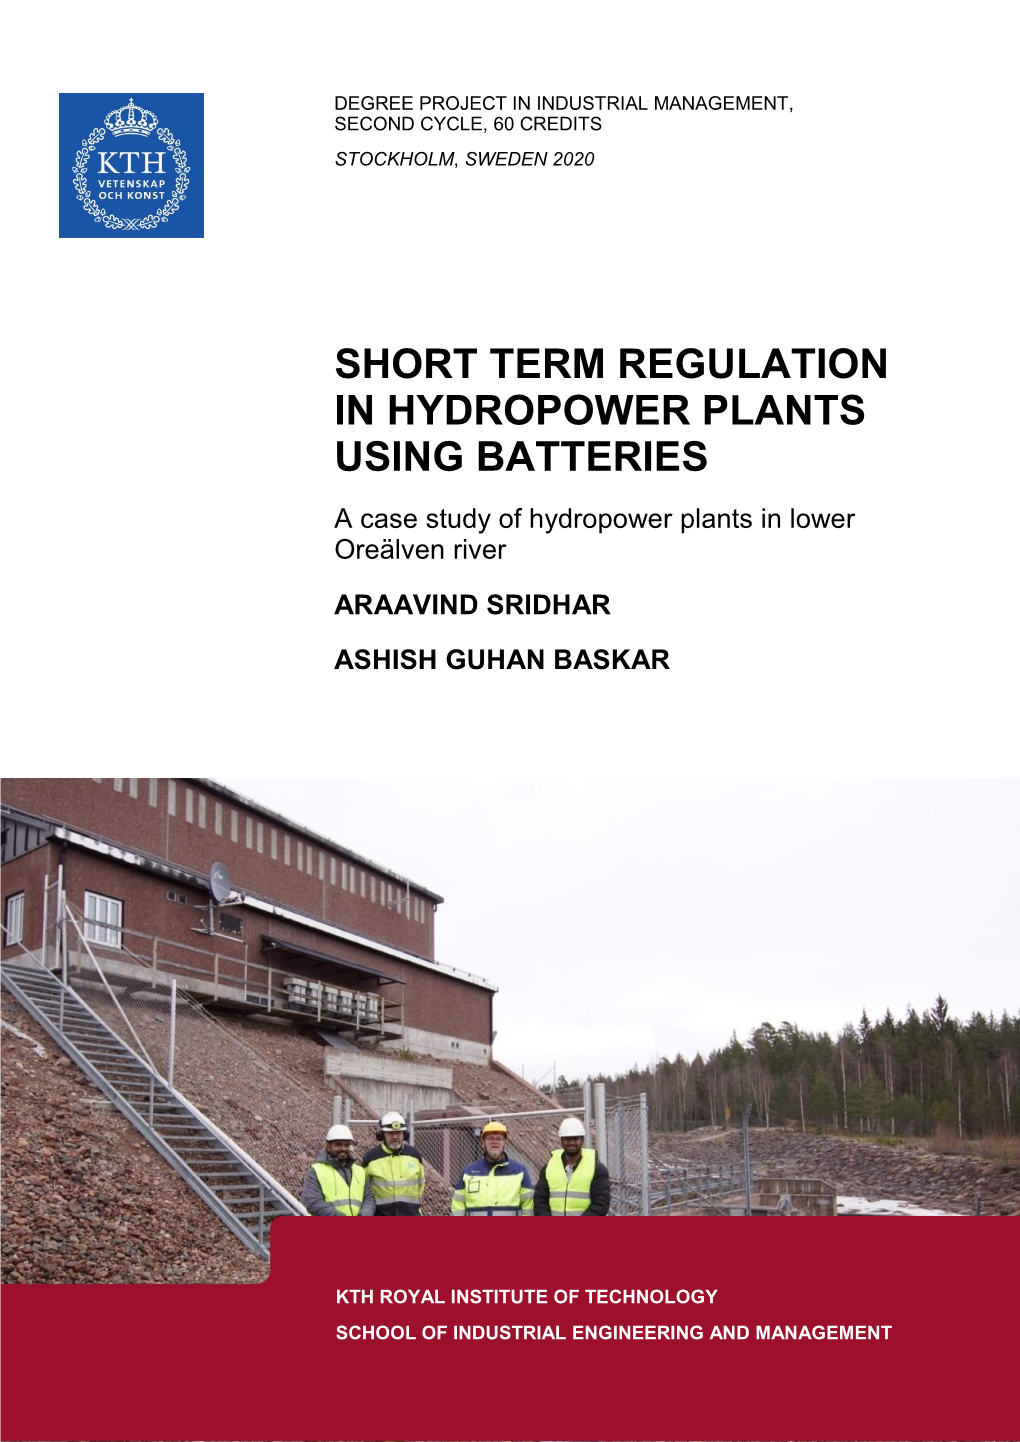 SHORT TERM REGULATION in HYDROPOWER PLANTS USING BATTERIES a Case Study of Hydropower Plants in Lower Oreälven River